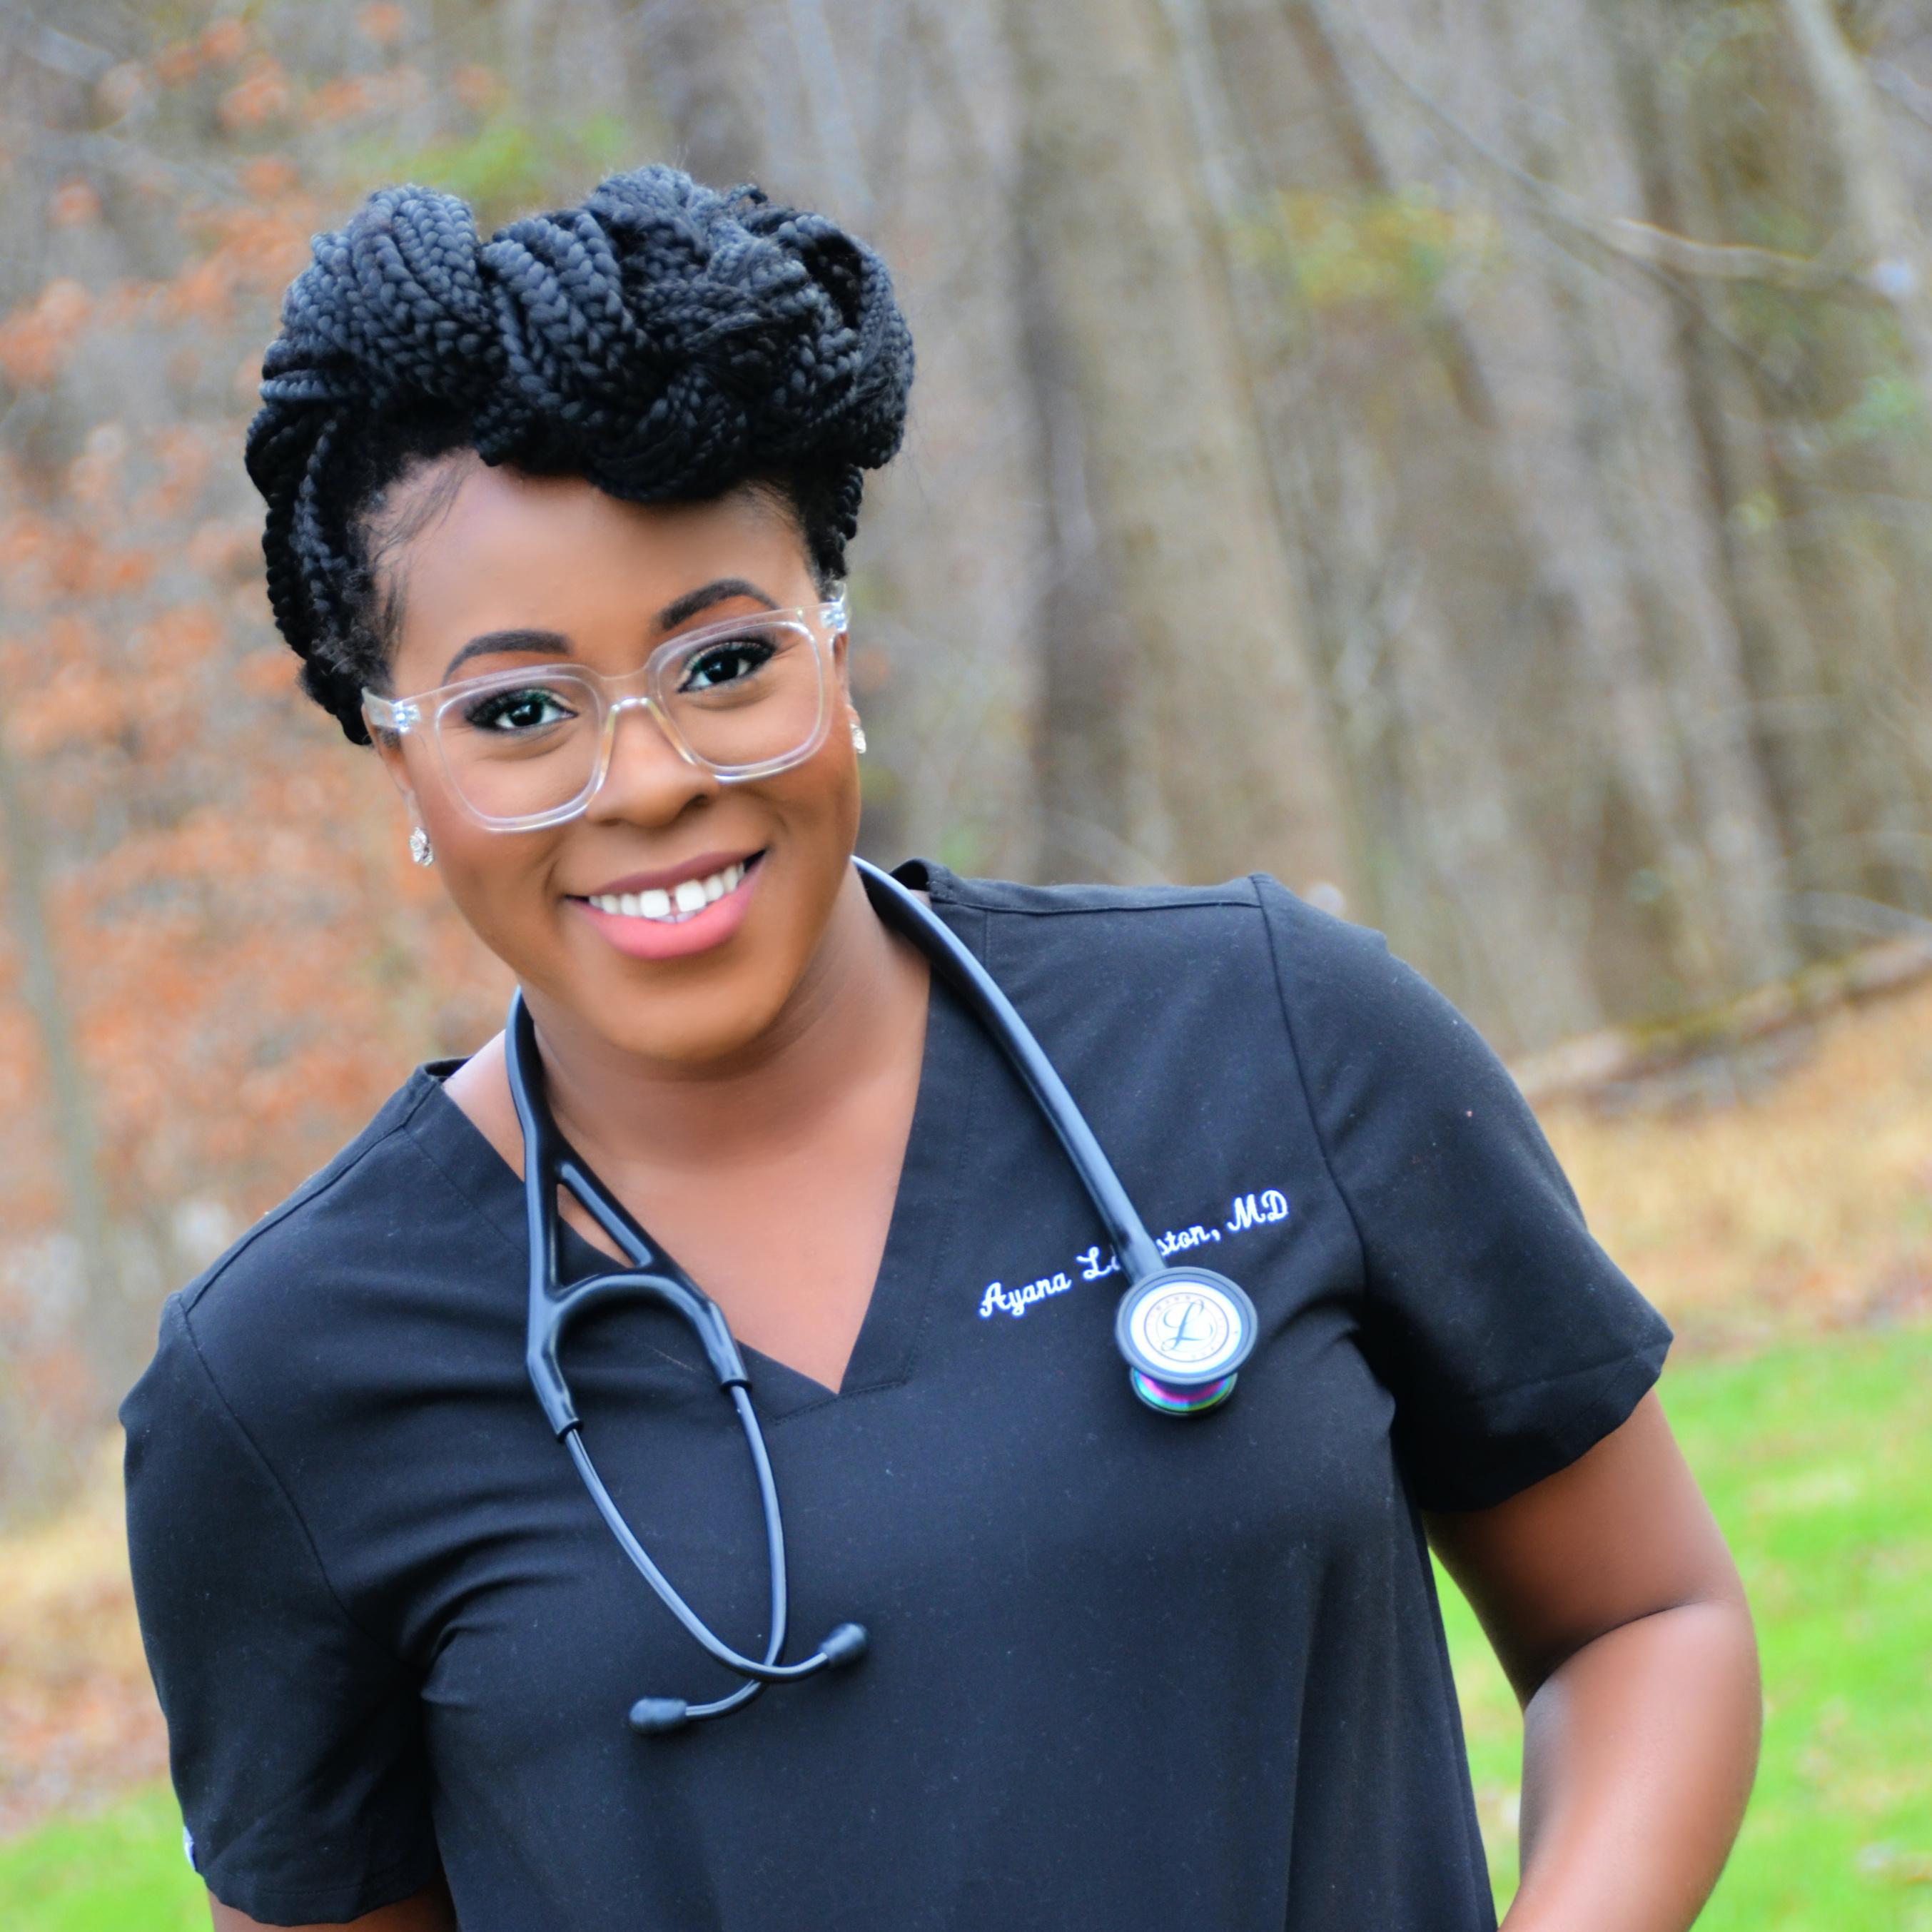 Ayana Langston wearing glasses, a stethoscope around her neck and navy blue scrubs